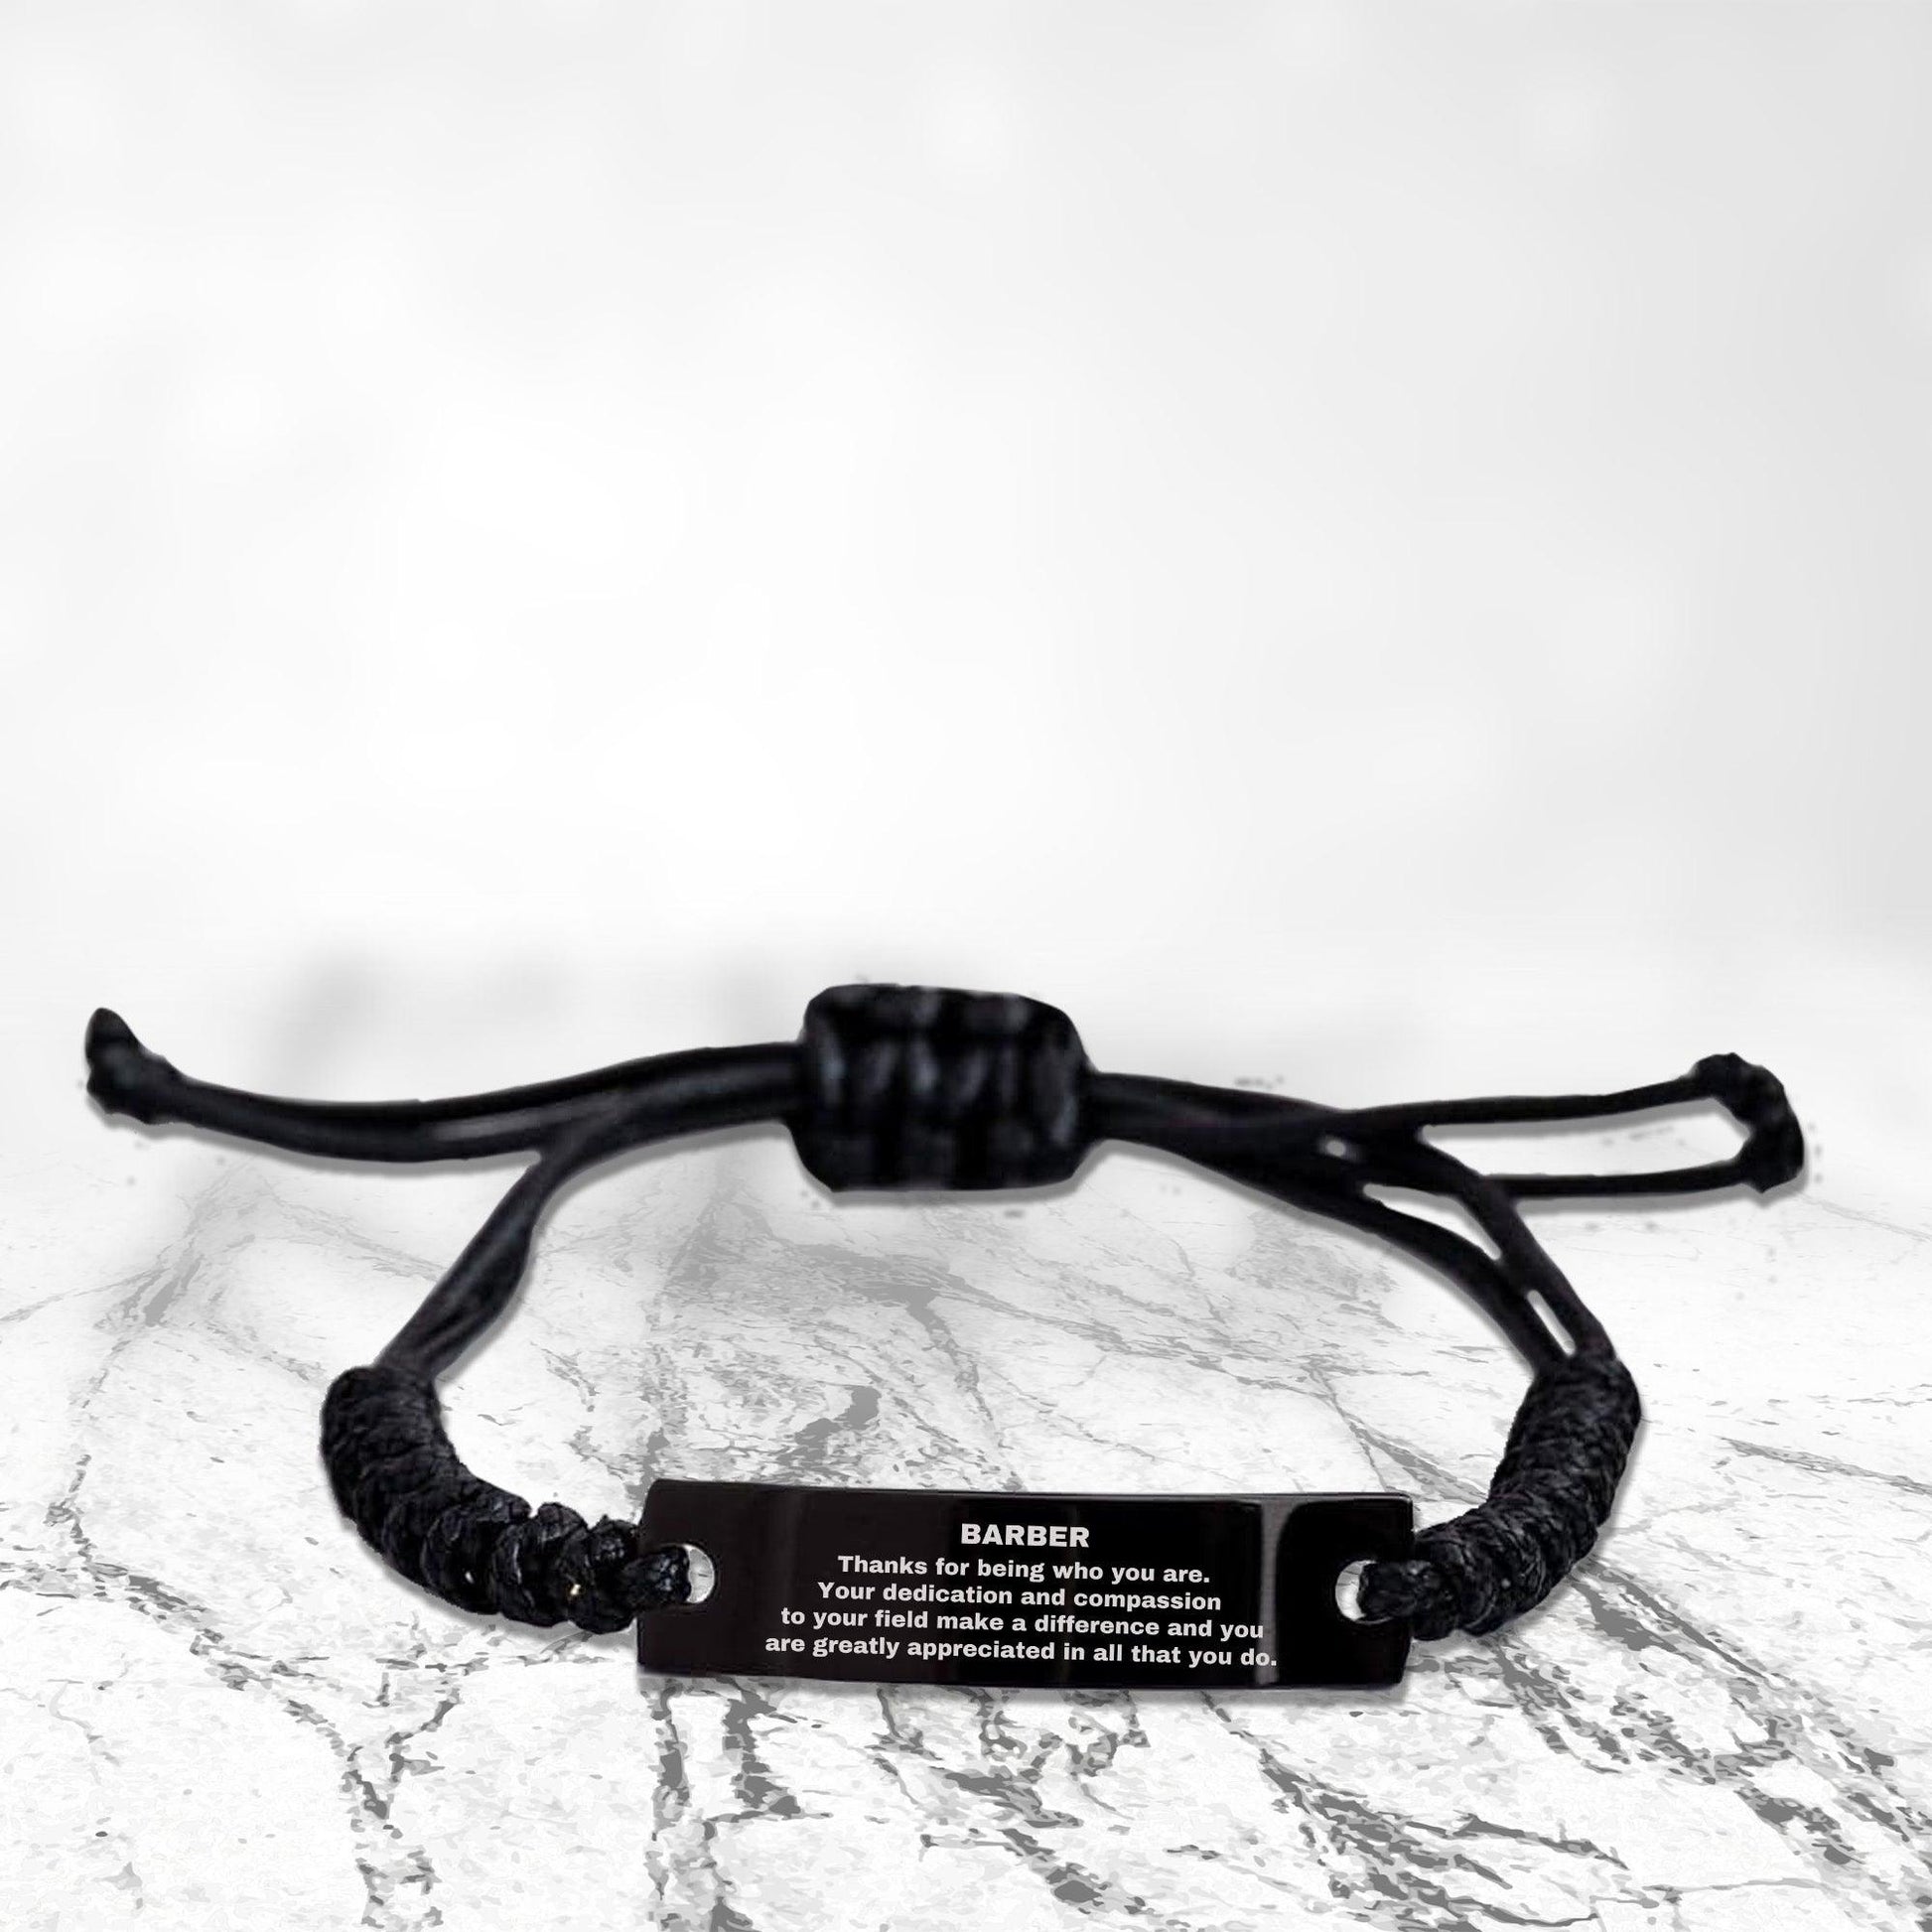 Barber Black Braided Leather Rope Engraved Bracelet - Thanks for being who you are - Birthday Christmas Jewelry Gifts Coworkers Colleague Boss - Mallard Moon Gift Shop